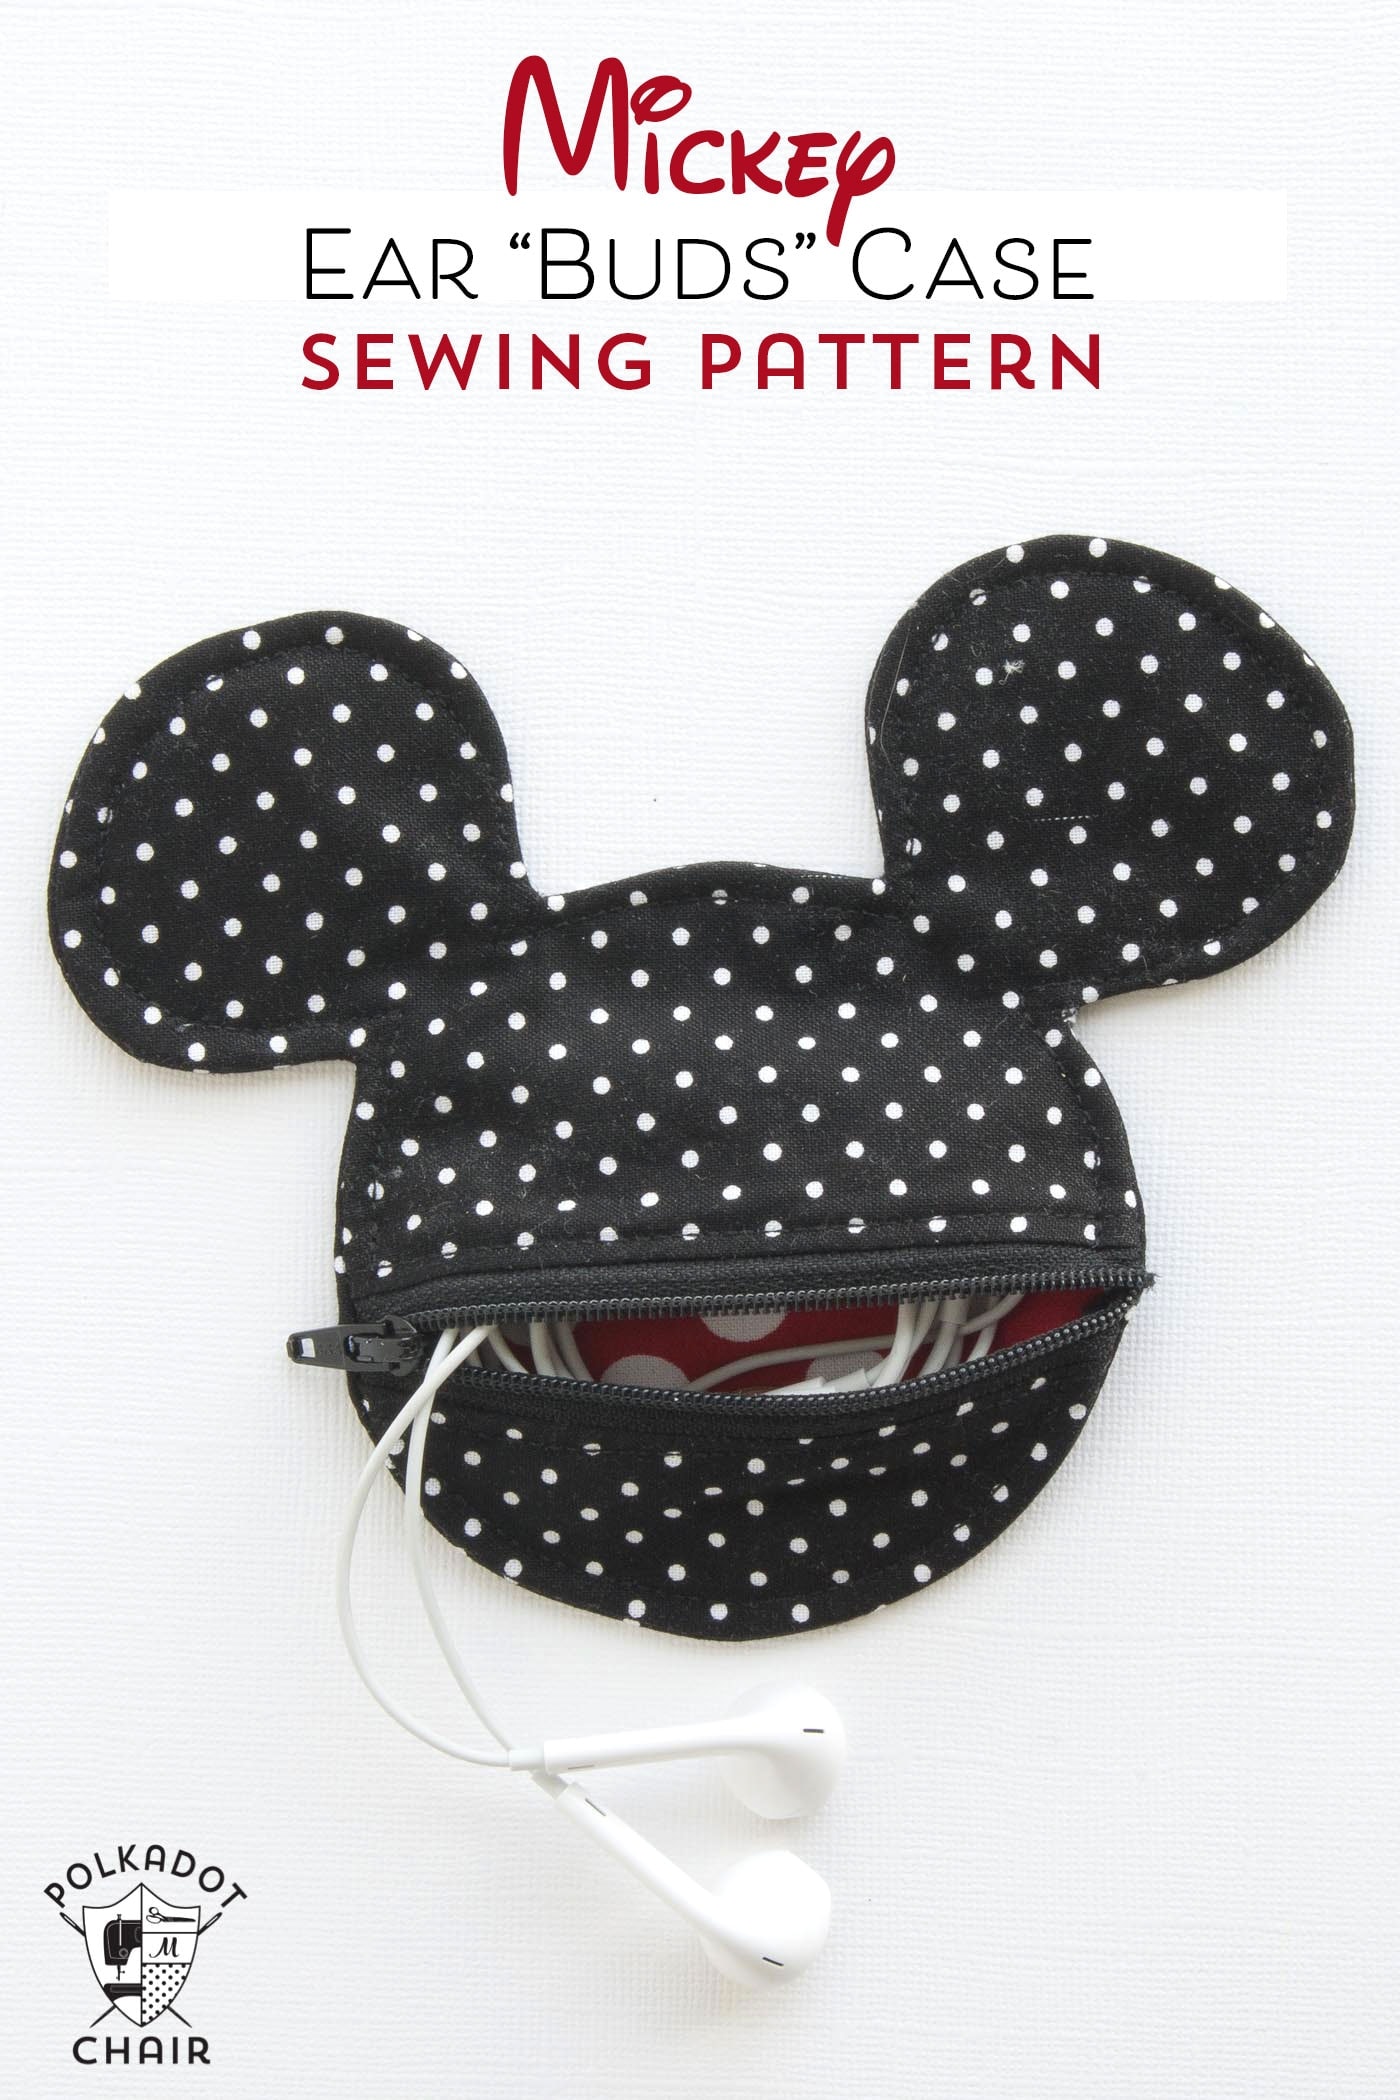 Free Sewing pattern for a Mickey Mouse inspired earbuds case / coin purse. This would be so cute to make before my next Disney vacation!